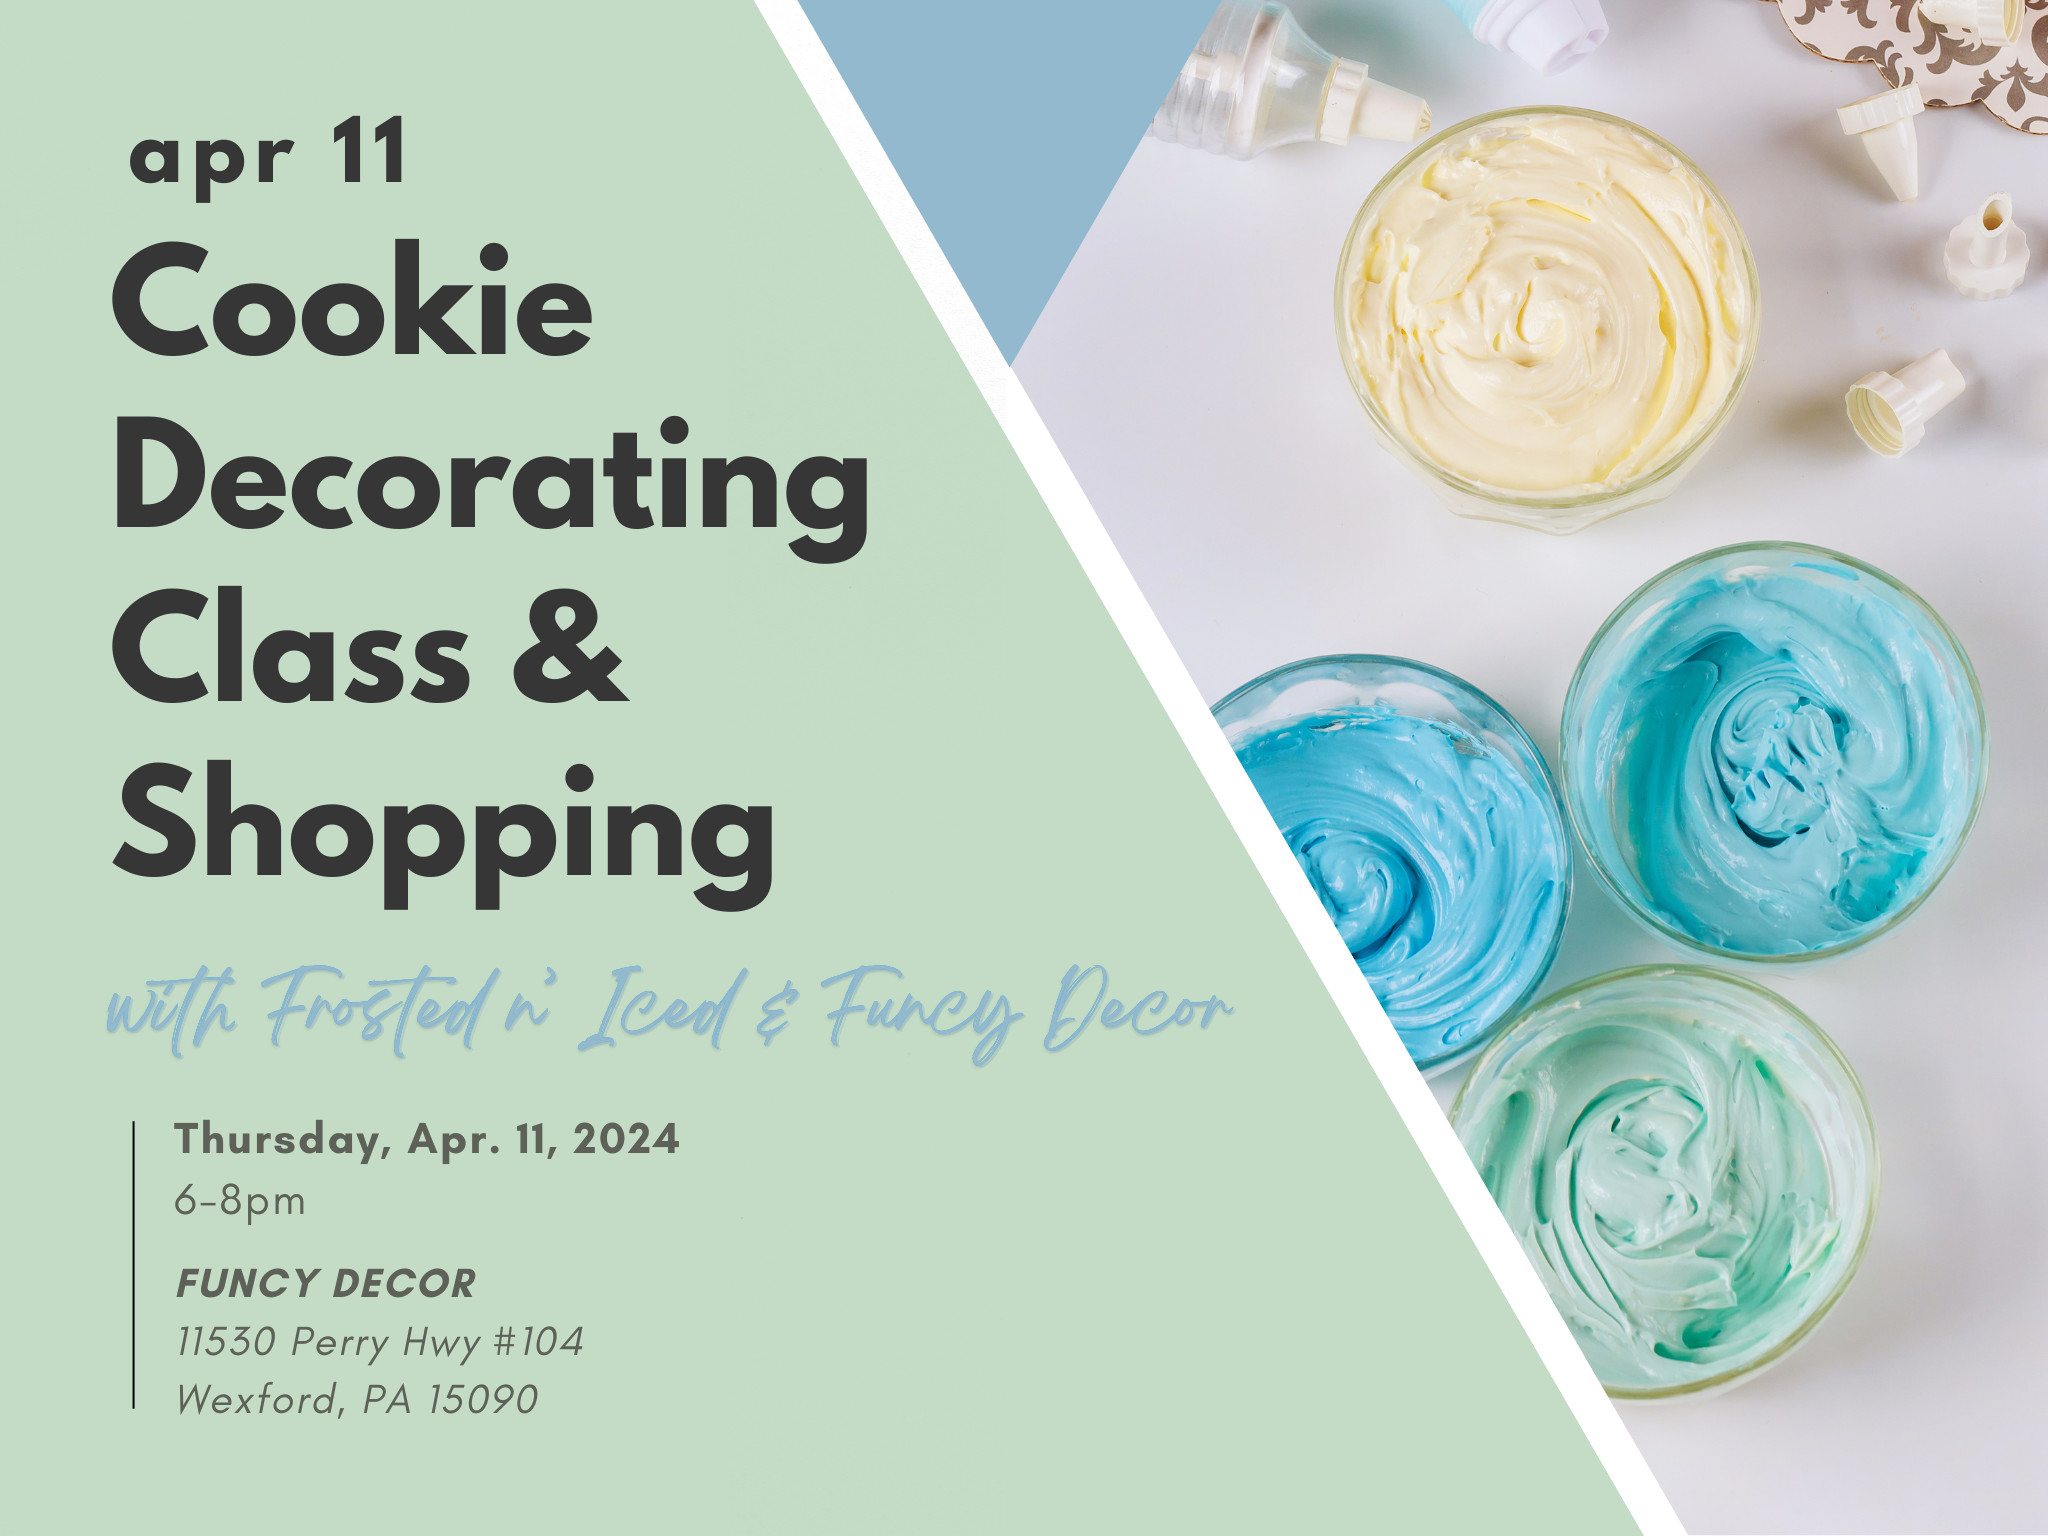 Cookie Decorating Class and Shopping at Funcy Decor